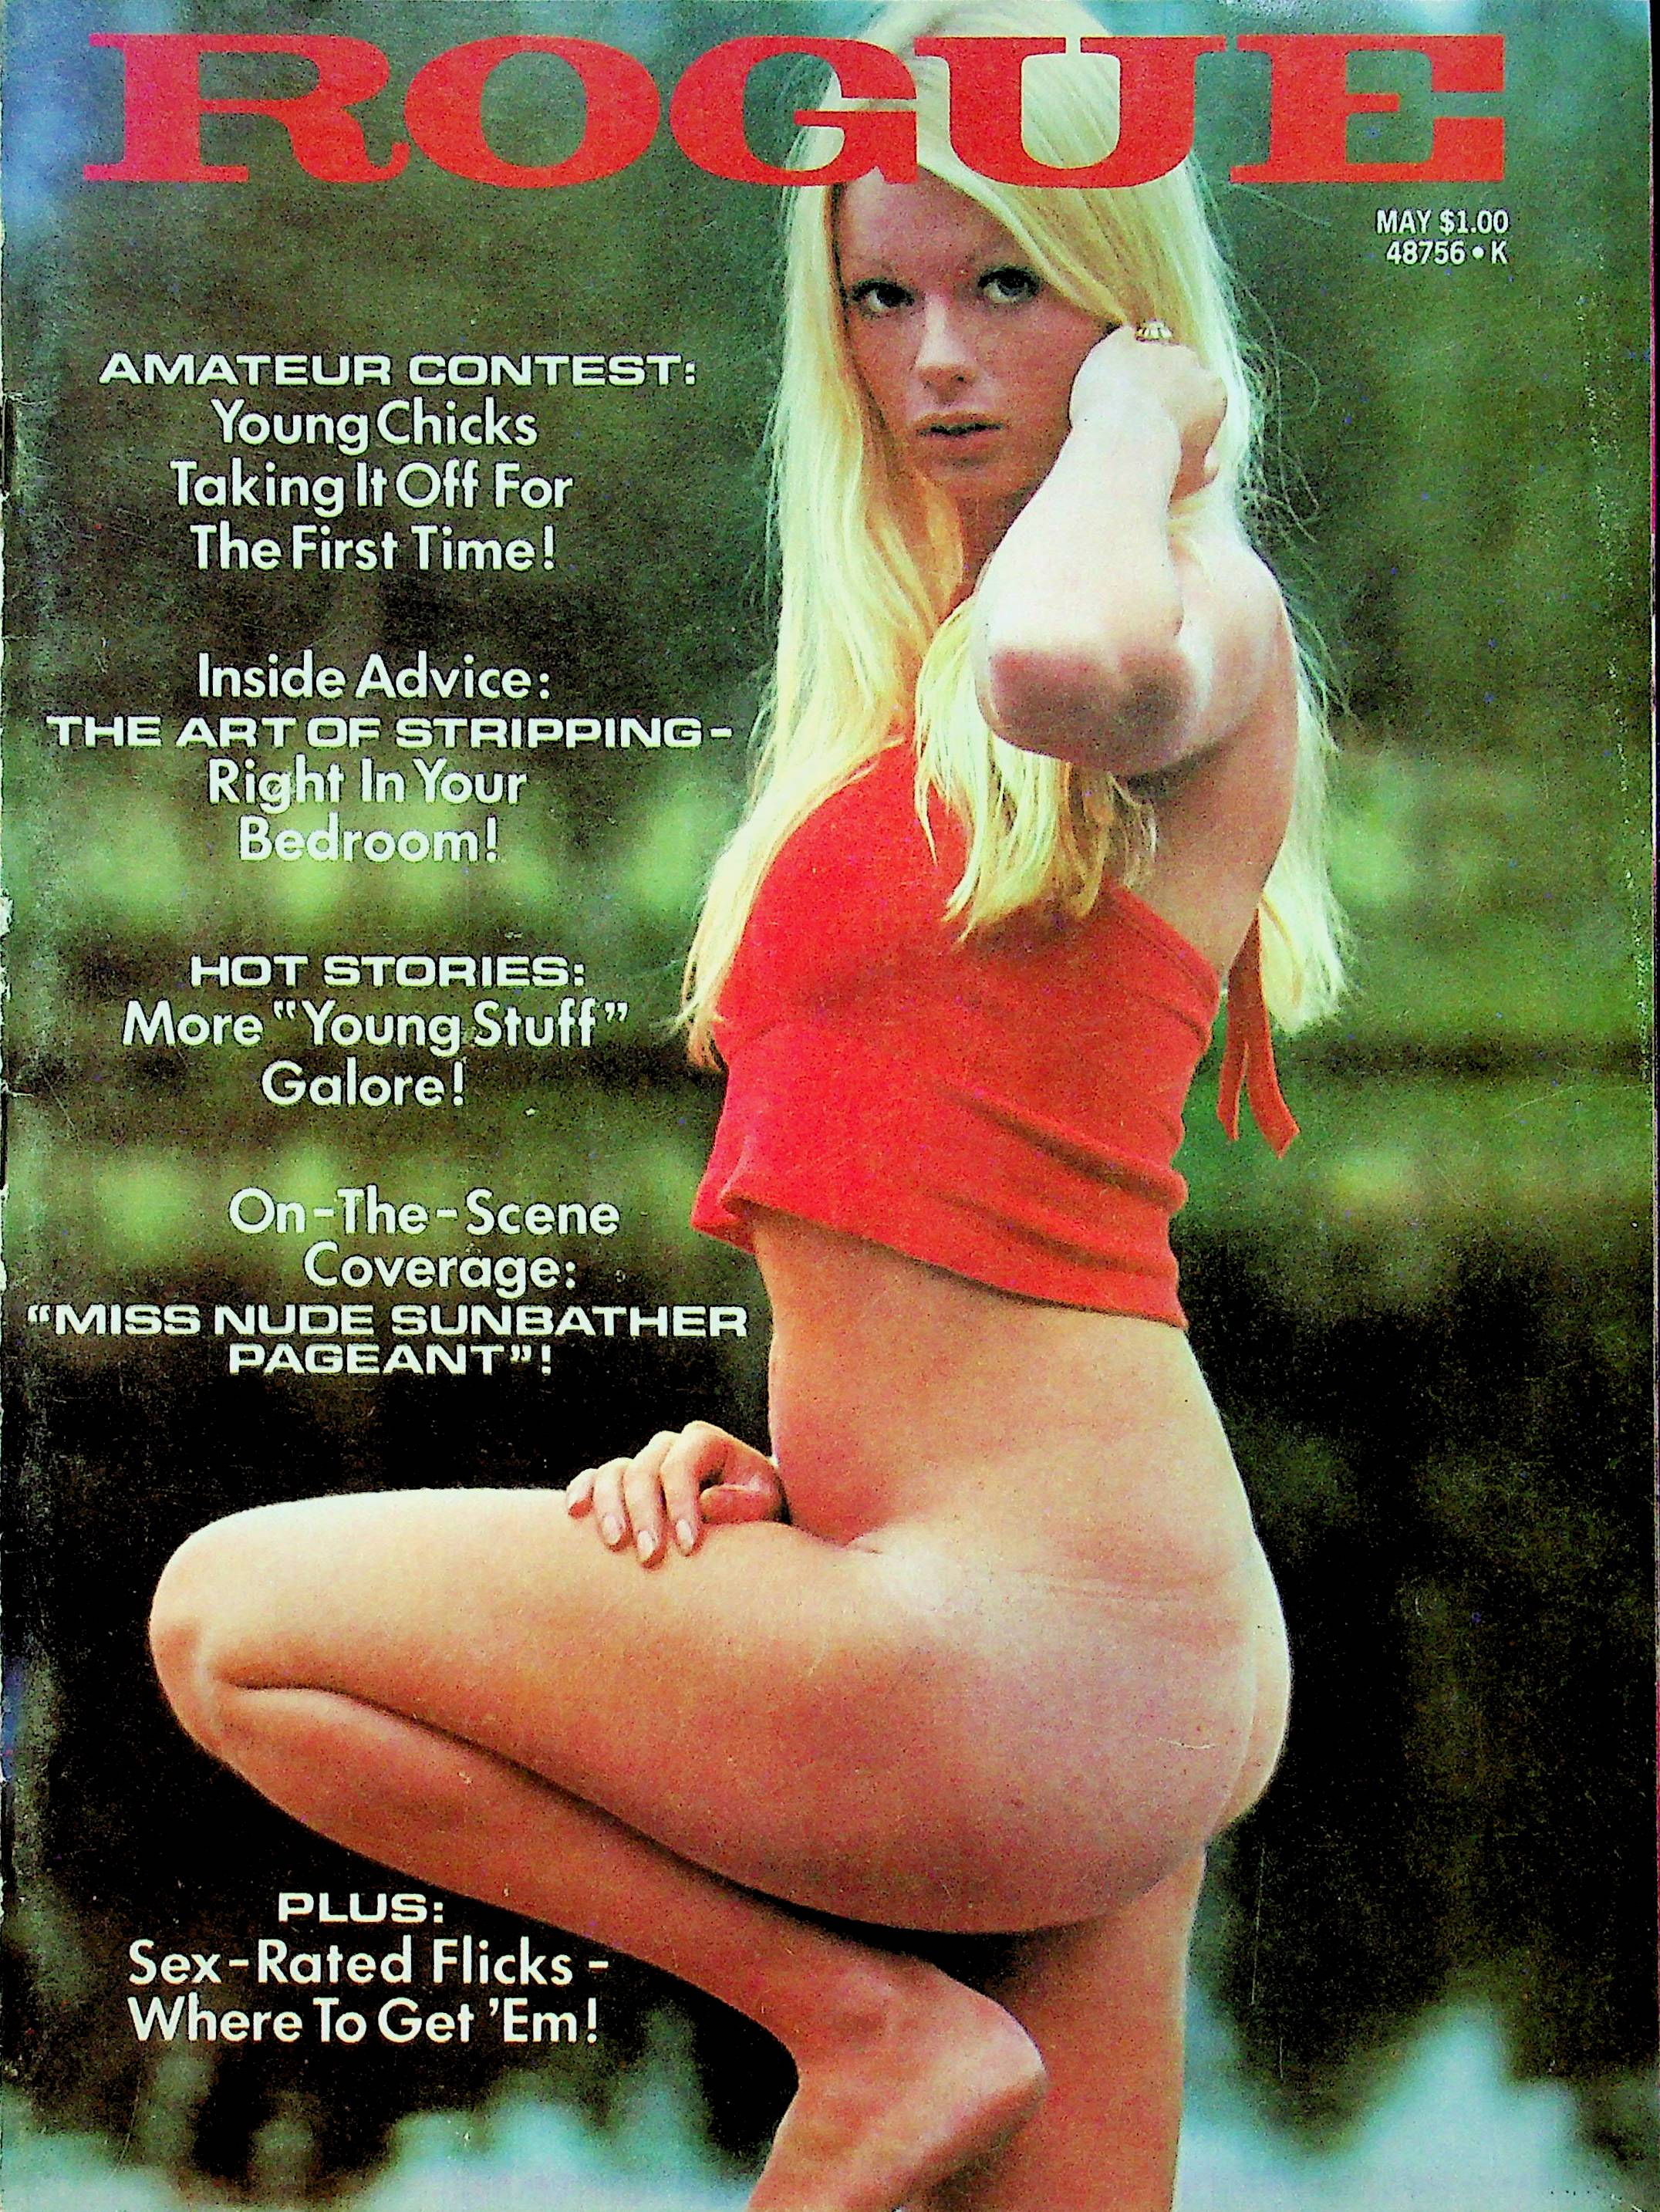 Rogue Adult Magazine Miss Nude Sunbather Pageant Bunny and Bev May 1973 pic